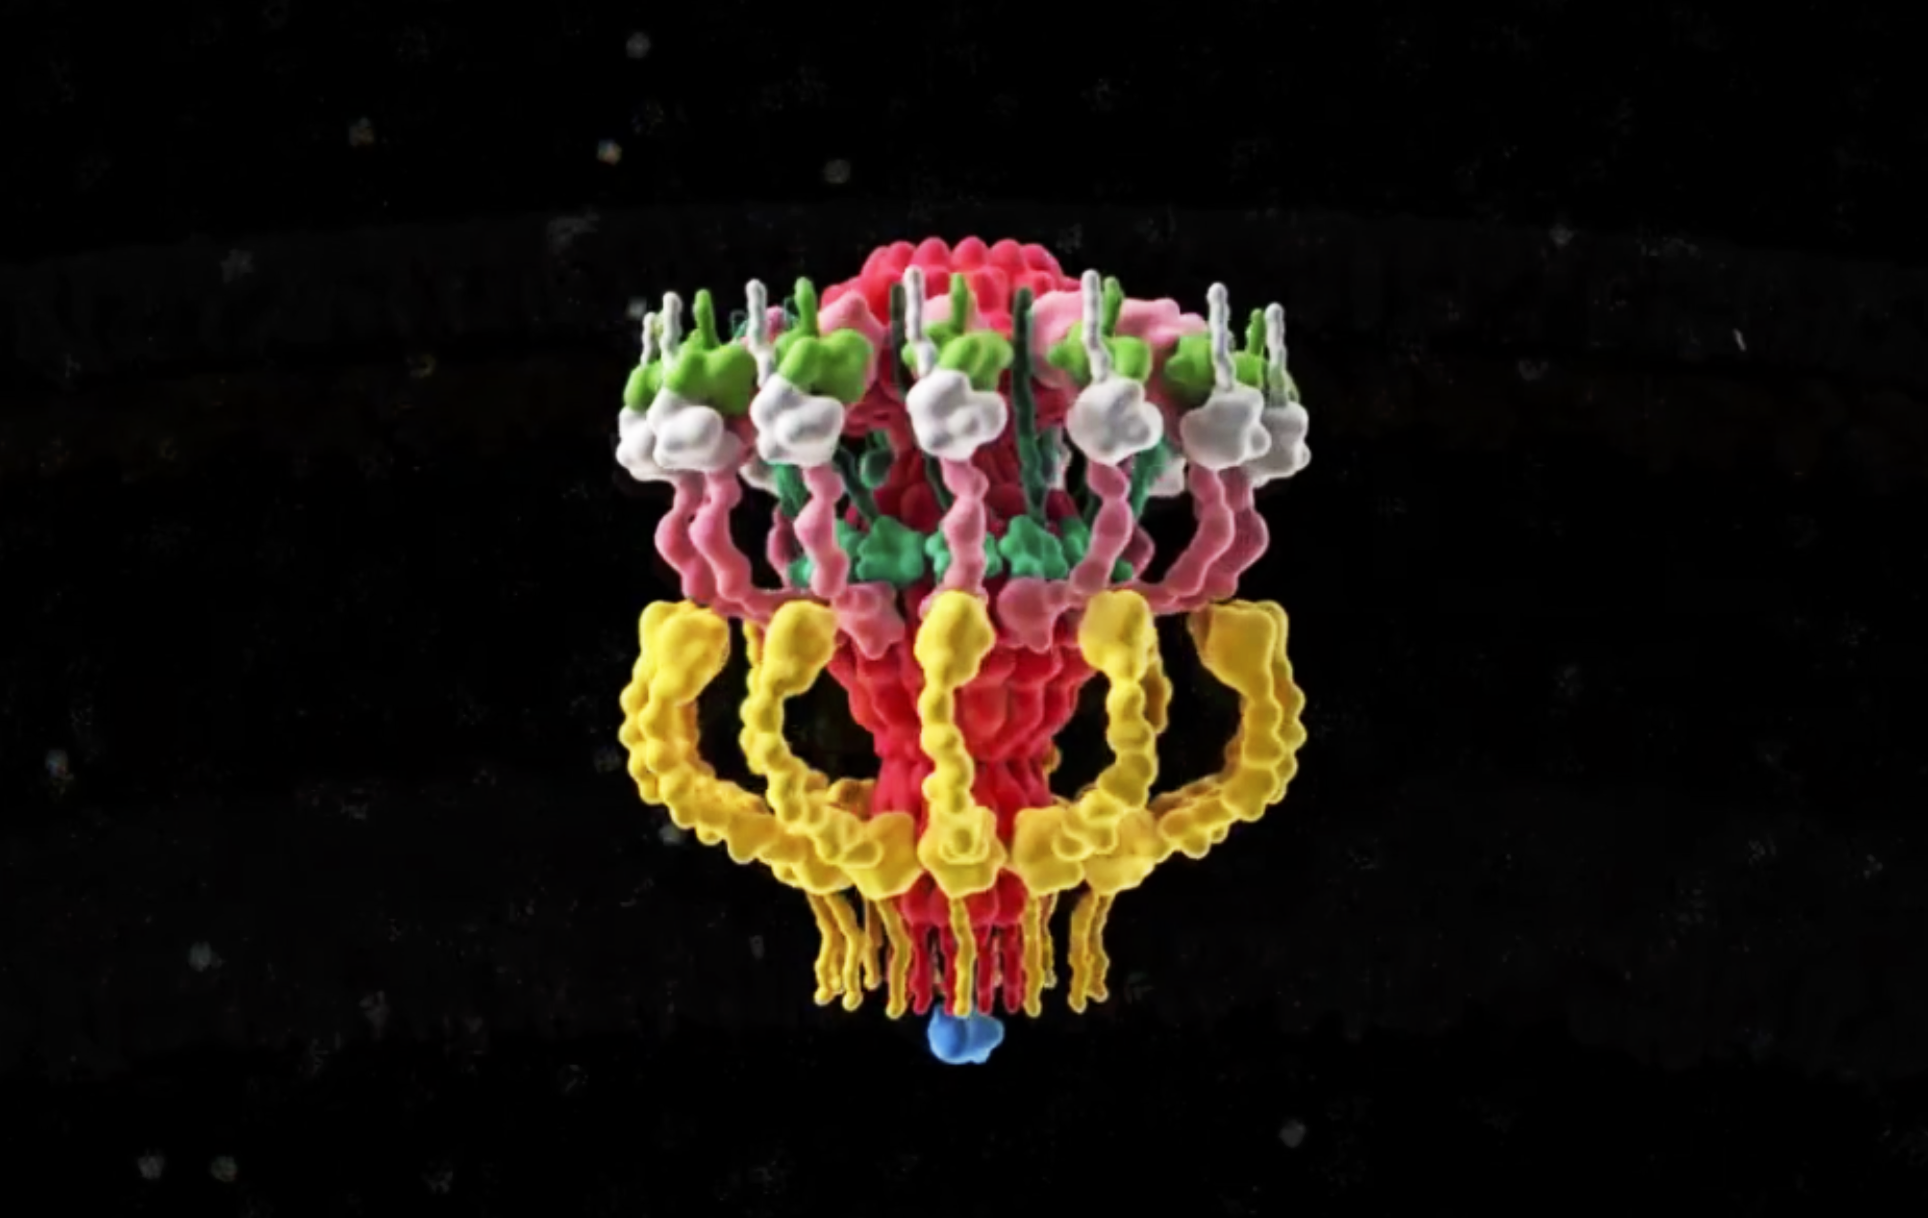 3D representation of the Dot/Icm complex showing a windowed secretion chamber (salmon, DotH; grey, DotD; green, DotK; and cyan, DotC), wings (yellow, DotF), a secretion channel (red, DotG) and the top-view of the complex